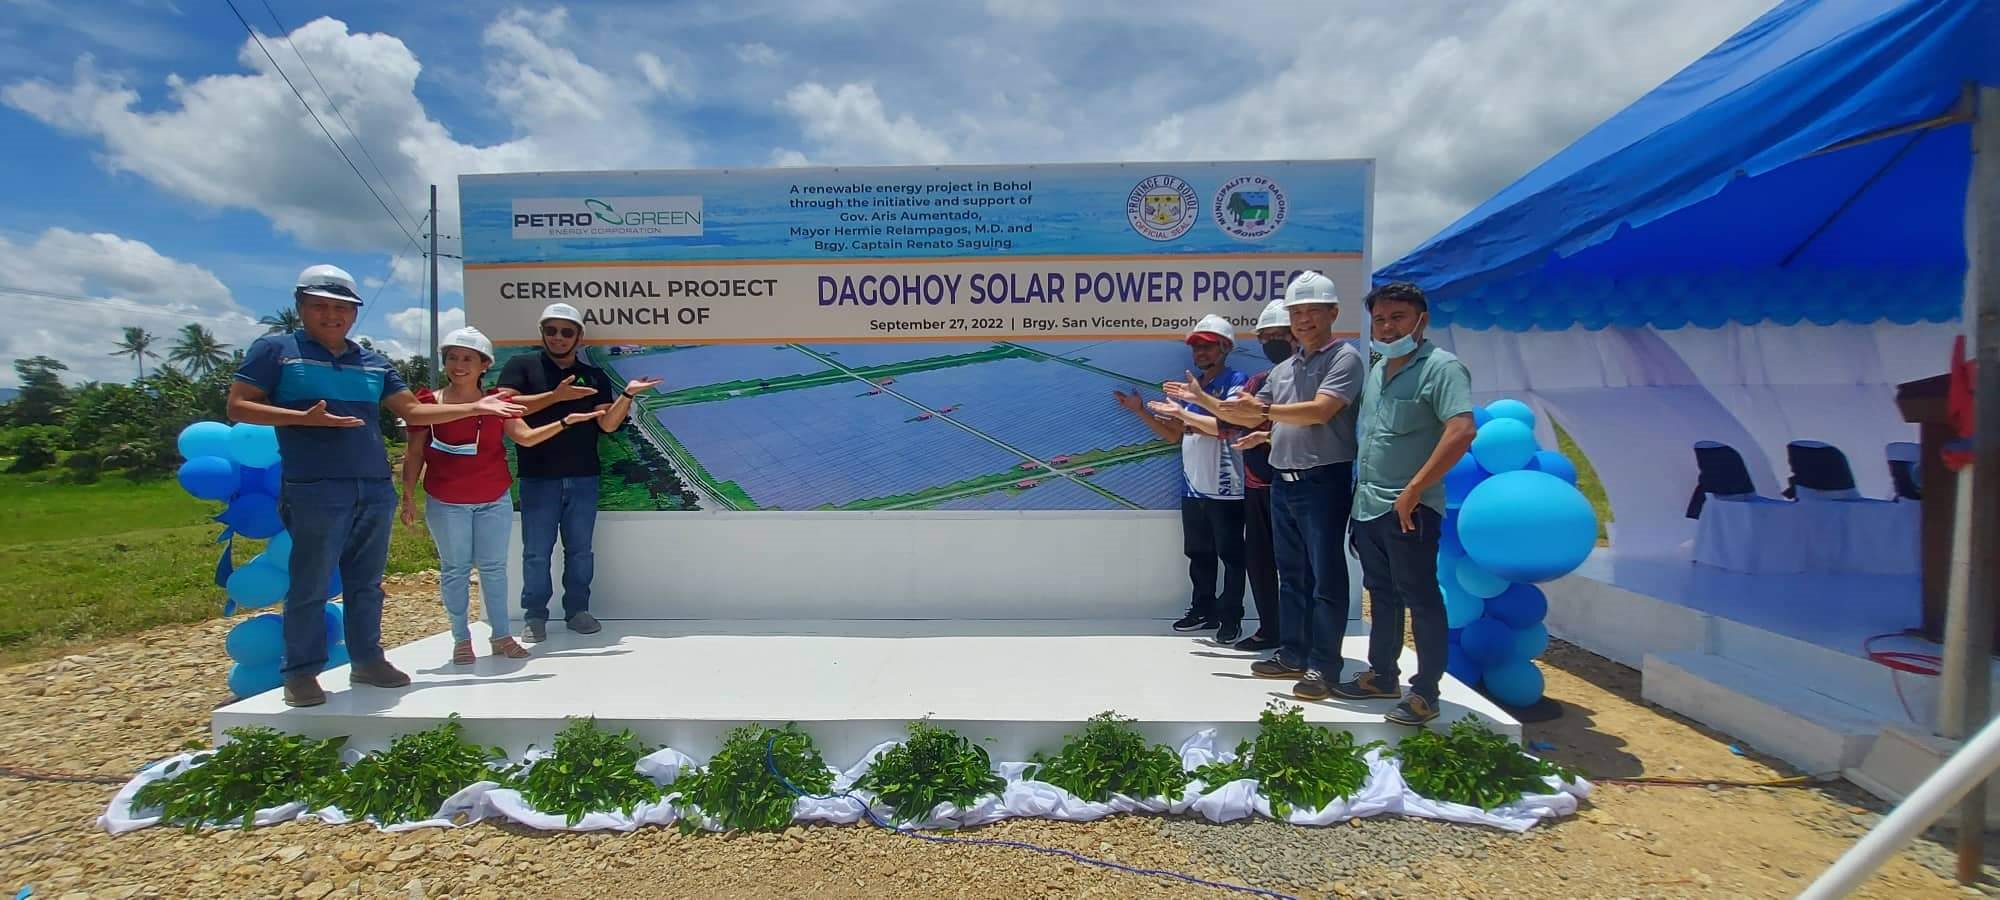 Officials attend the ceremonial project launching of the Dagohoy Solar Power Project by PetroGreenEnergy Corporation